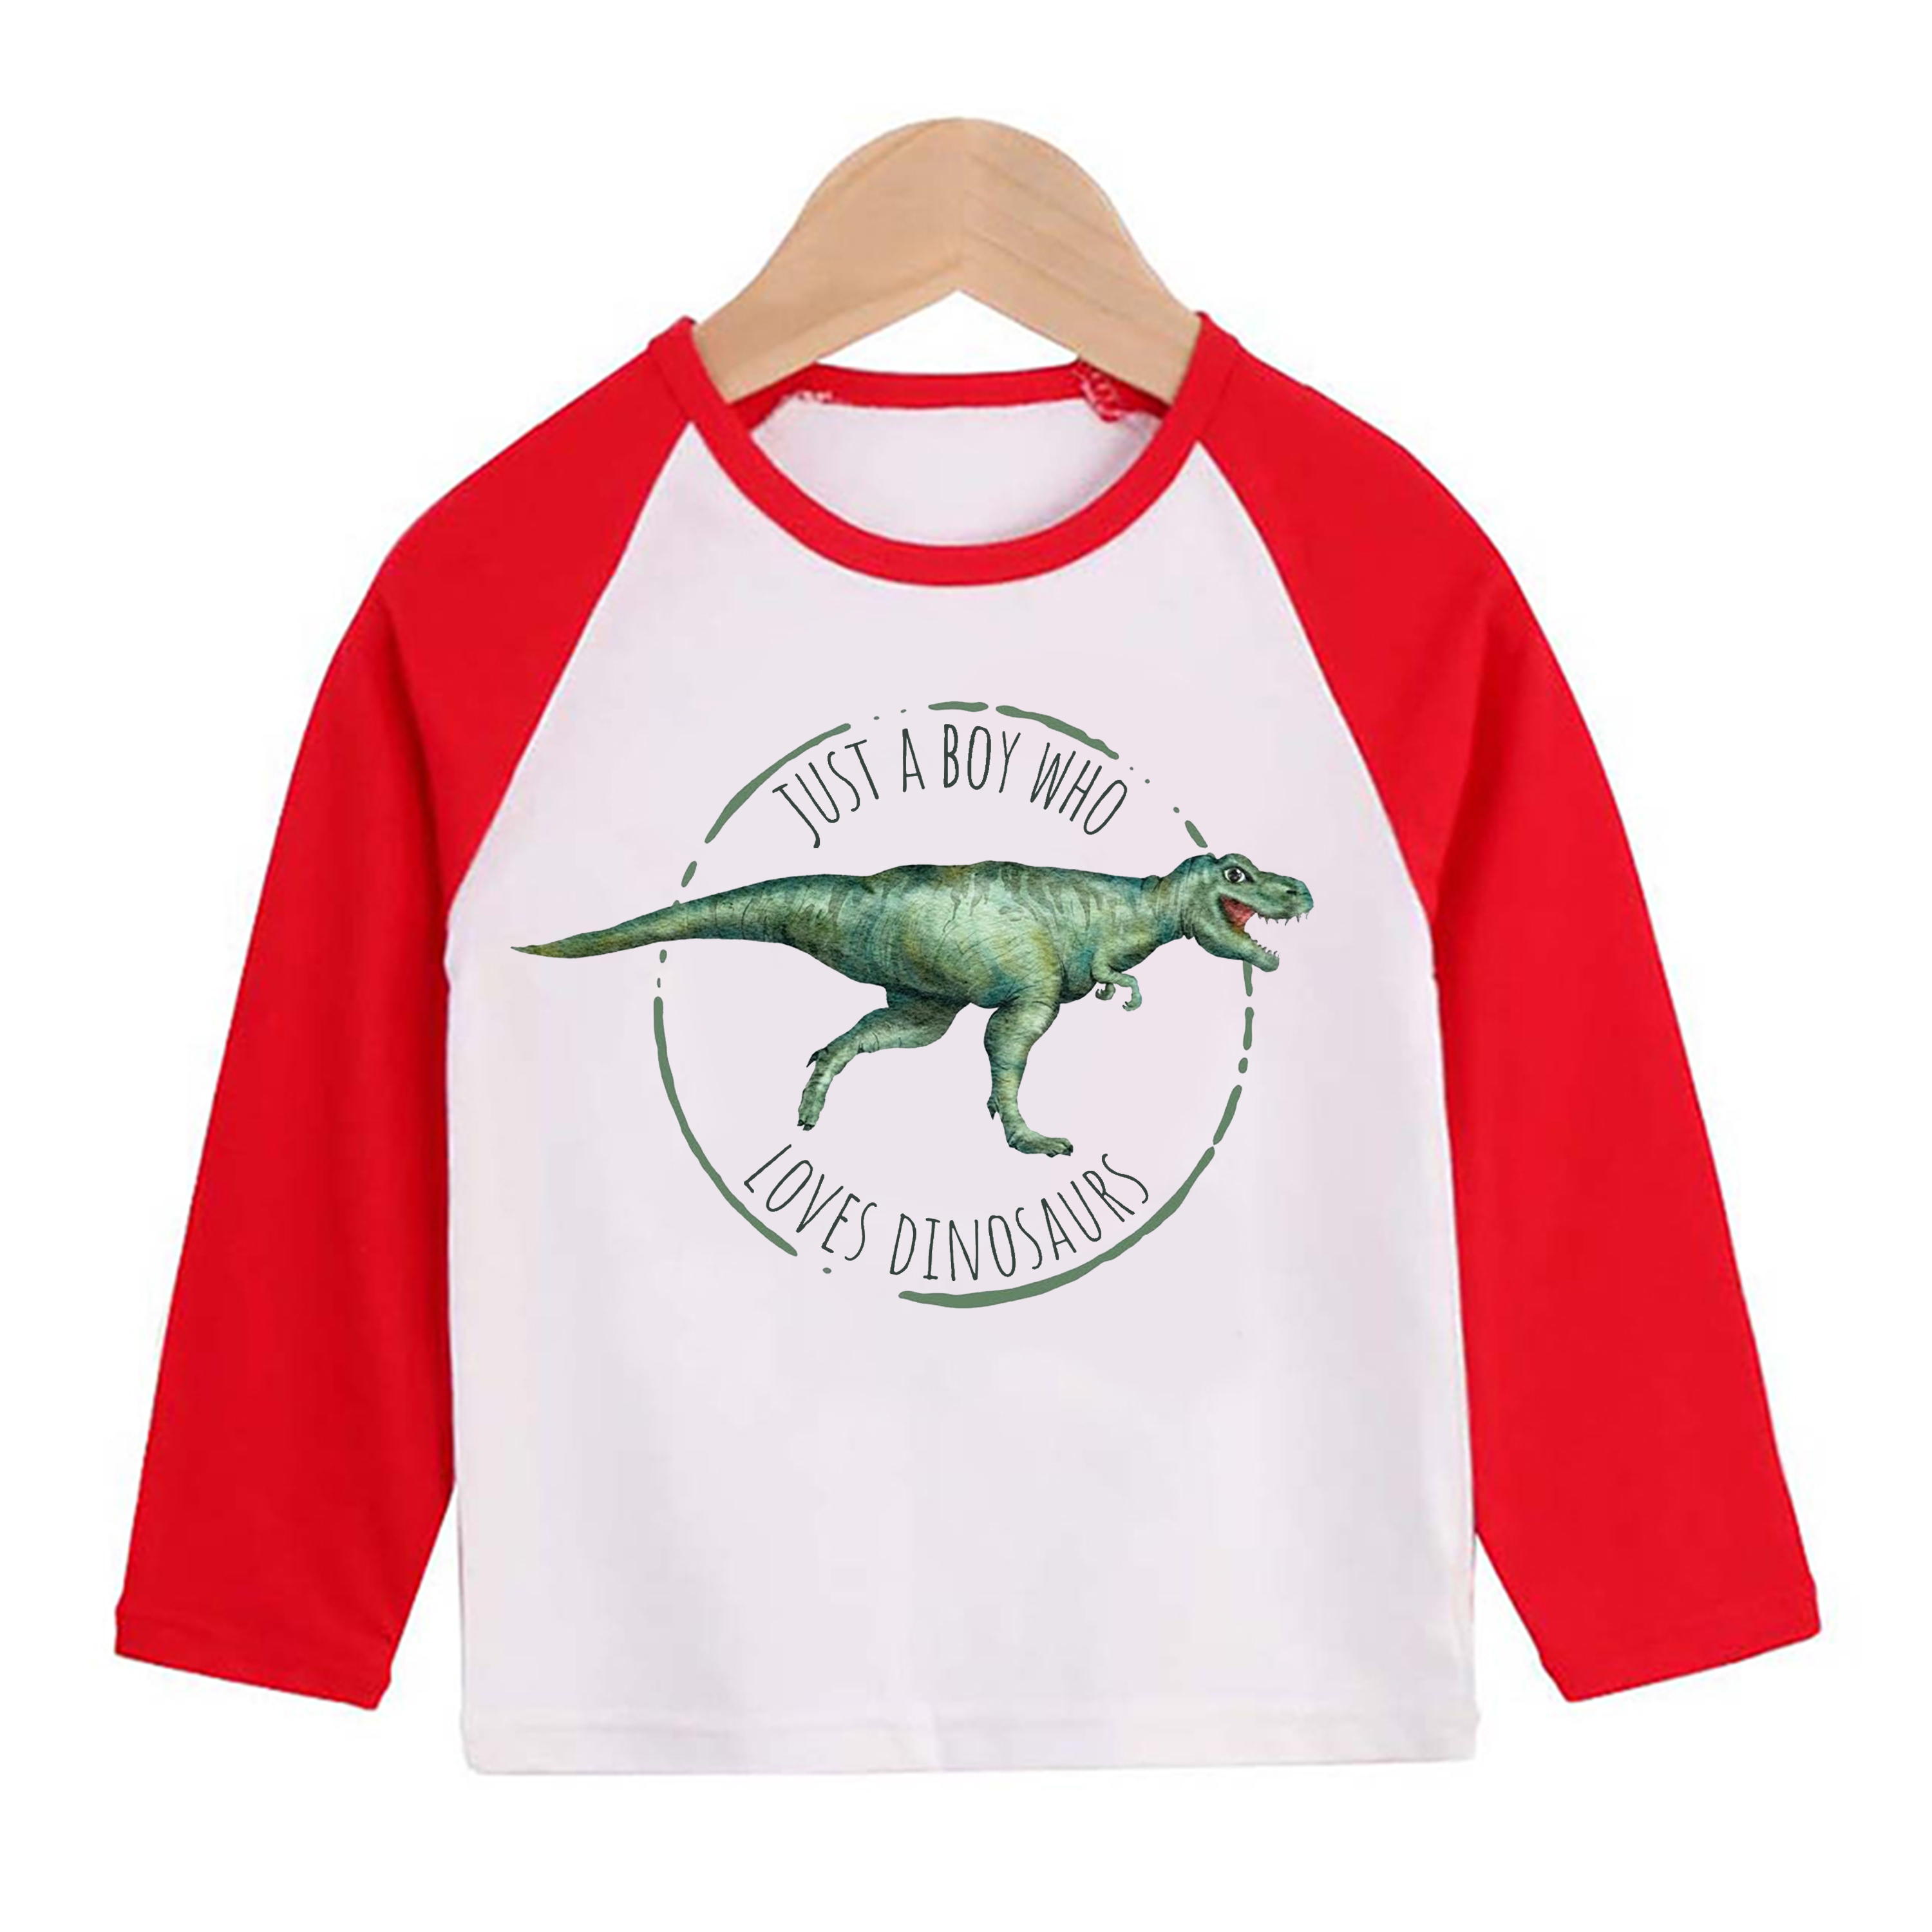 Just A Boy Who Loves Dinosaurs Long Sleeve Kids T-Shirt